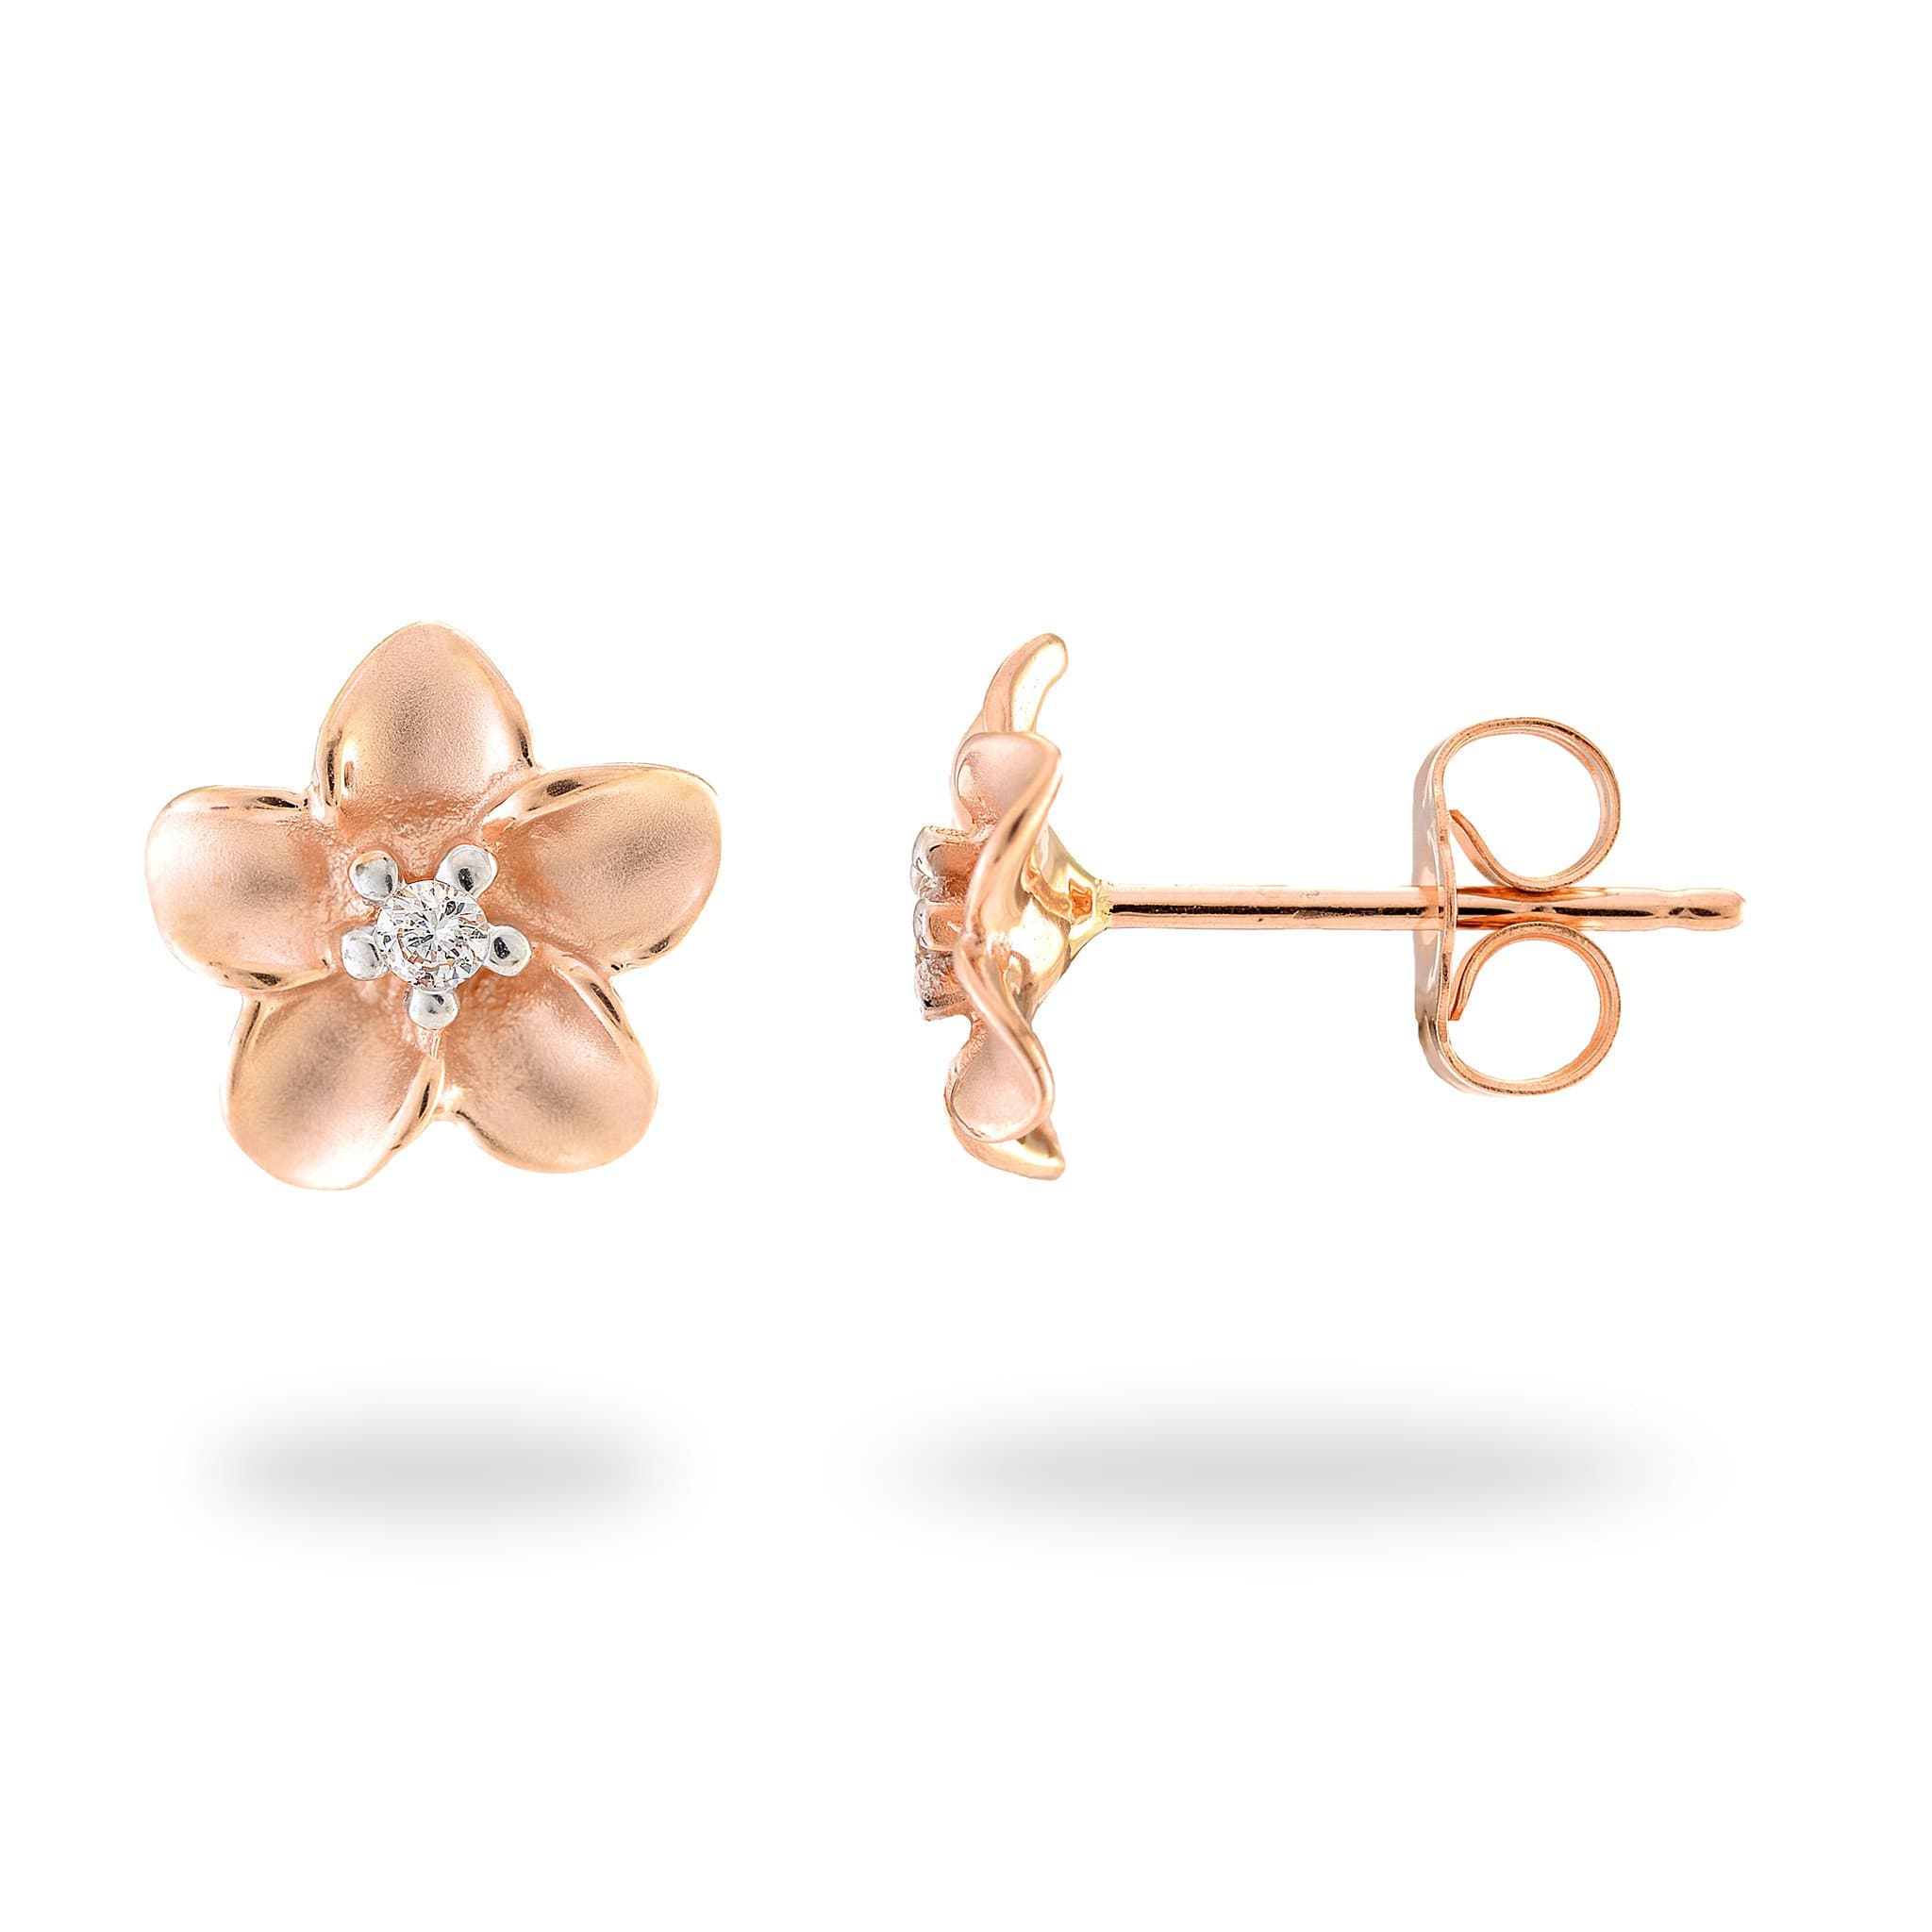 Plumeria Earrings in Rose Gold with Diamonds - 9mm – Maui Divers Jewelry